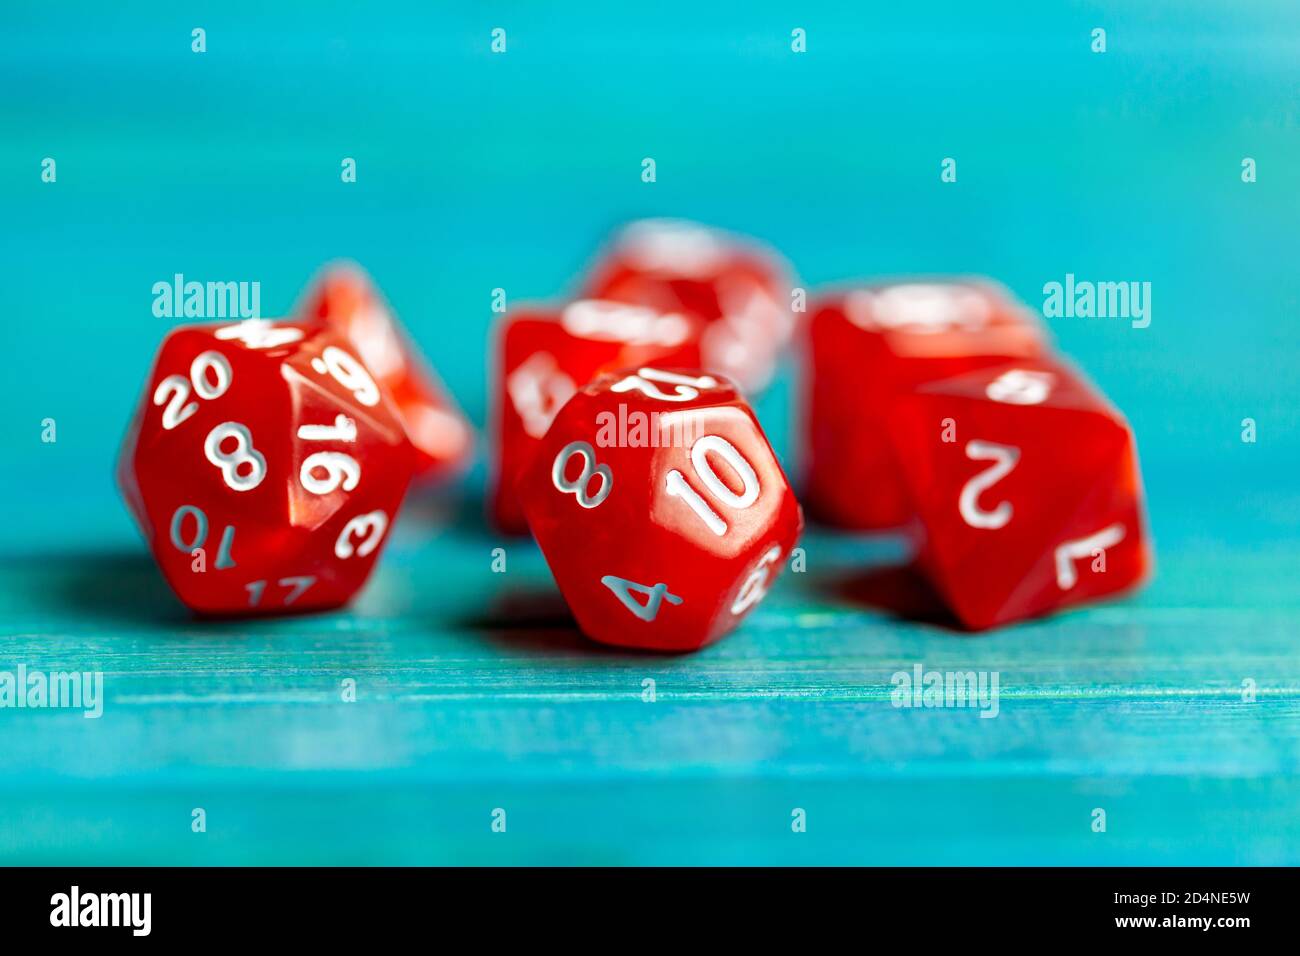 Simple red RPG board game dice set. Multiple role playing game polyhedral dice laying on the table, blue background. Tabletop games accessories Stock Photo